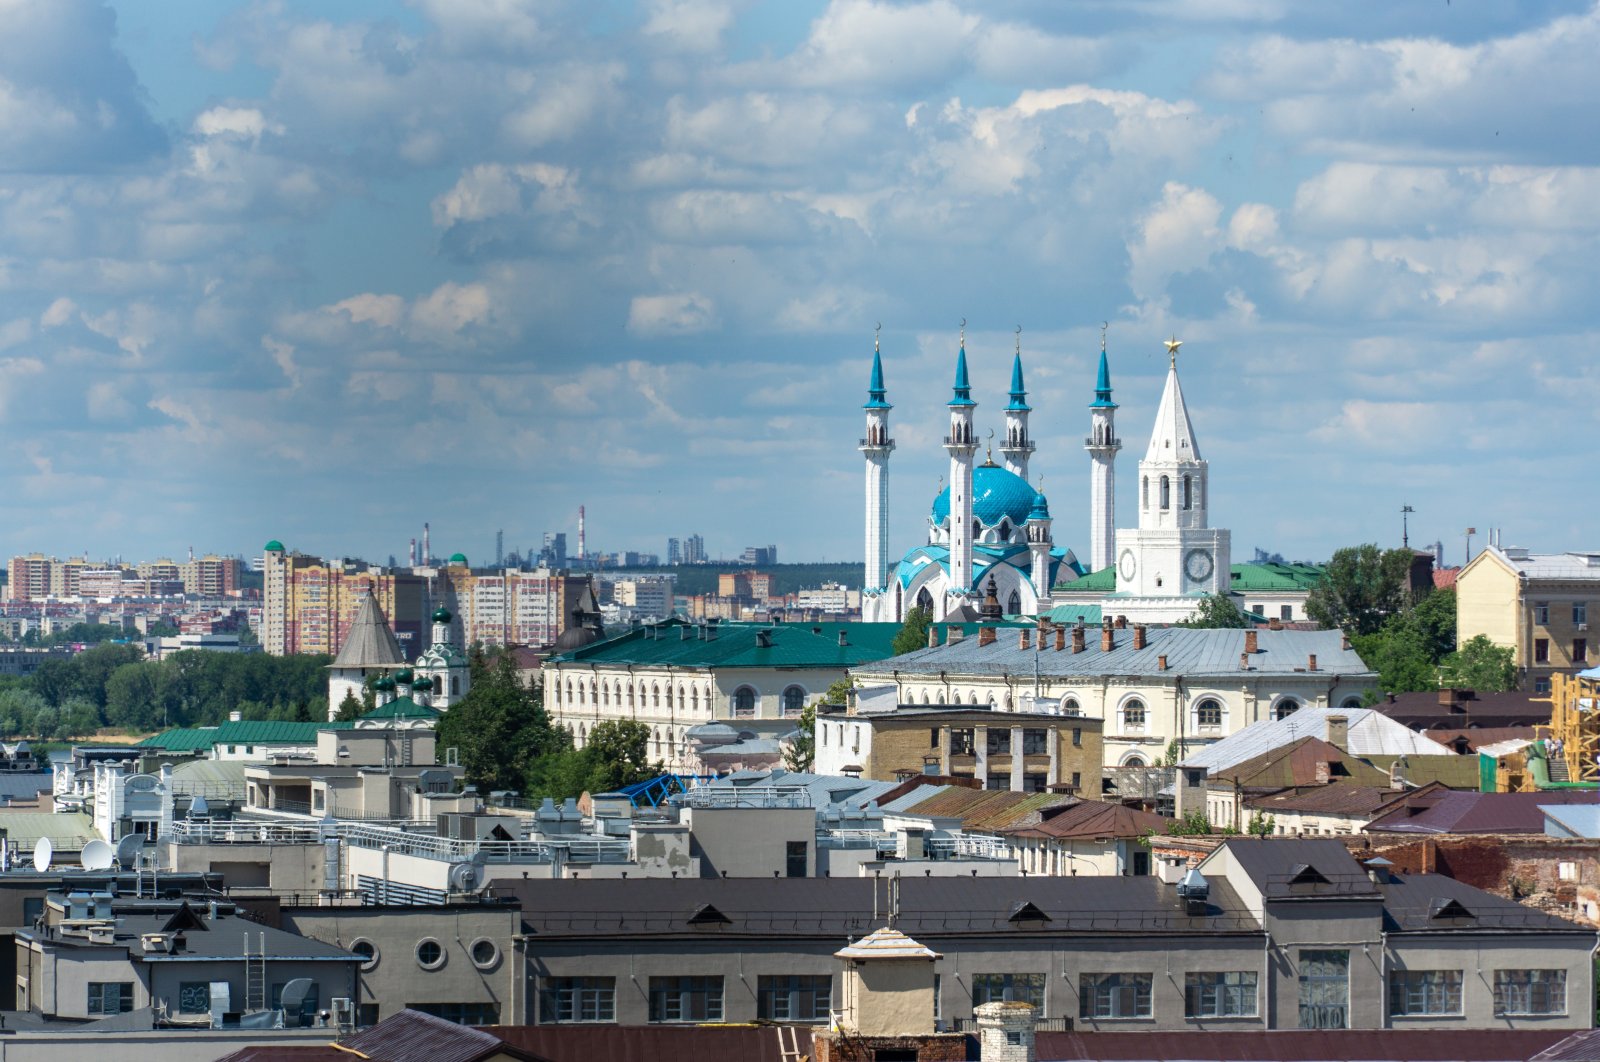 View of Kazan Kremlin from the tower, Tatarstan, Russia. (Getty Images)